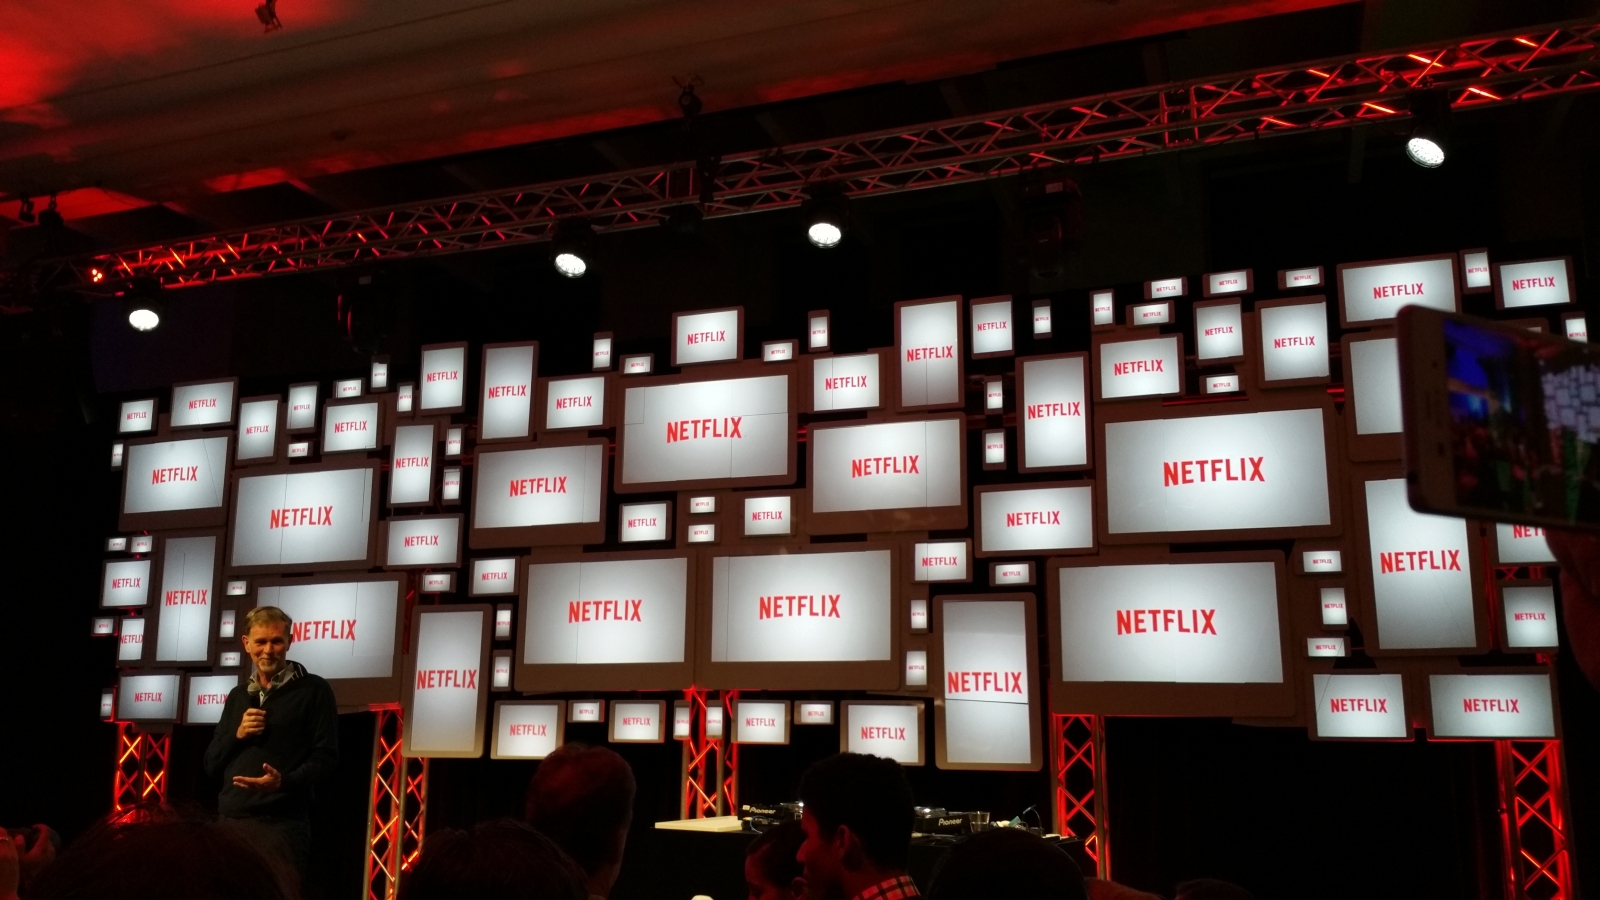 Ask LH: Is There A Way To Watch Netflix Offline?